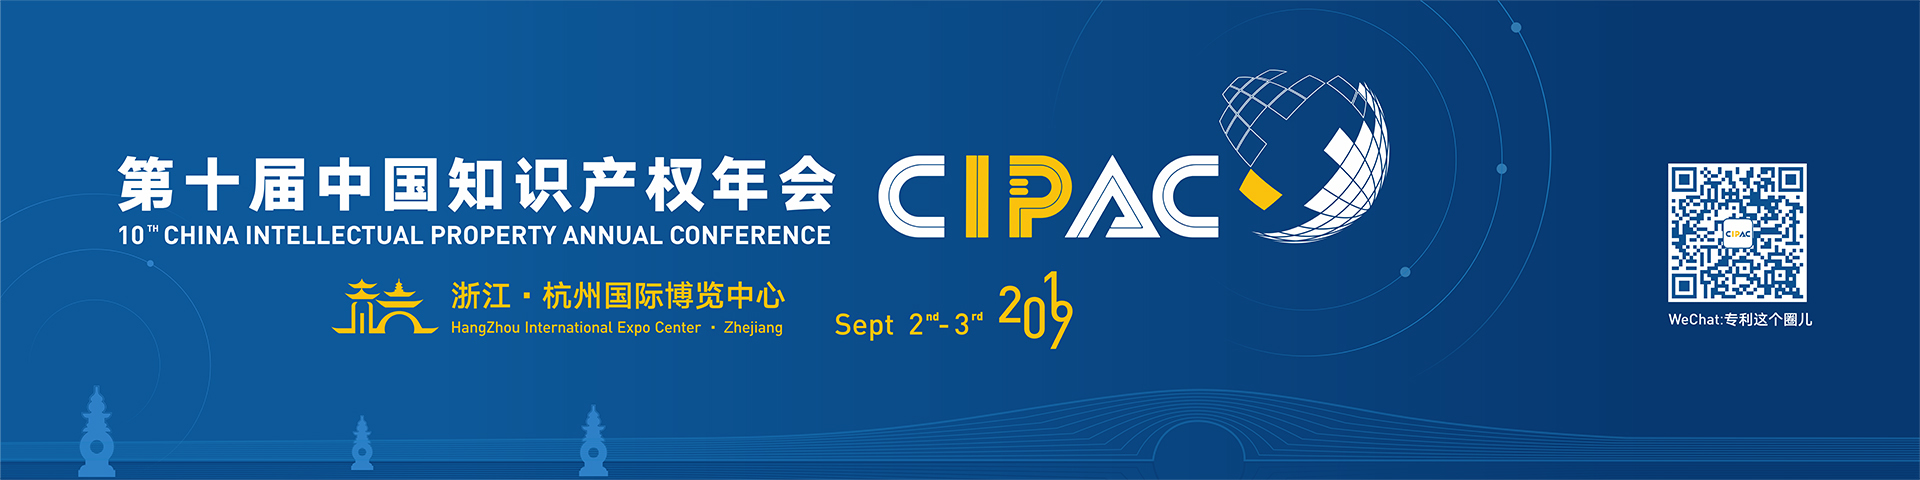 10th China Intellectual Property Annual Conference